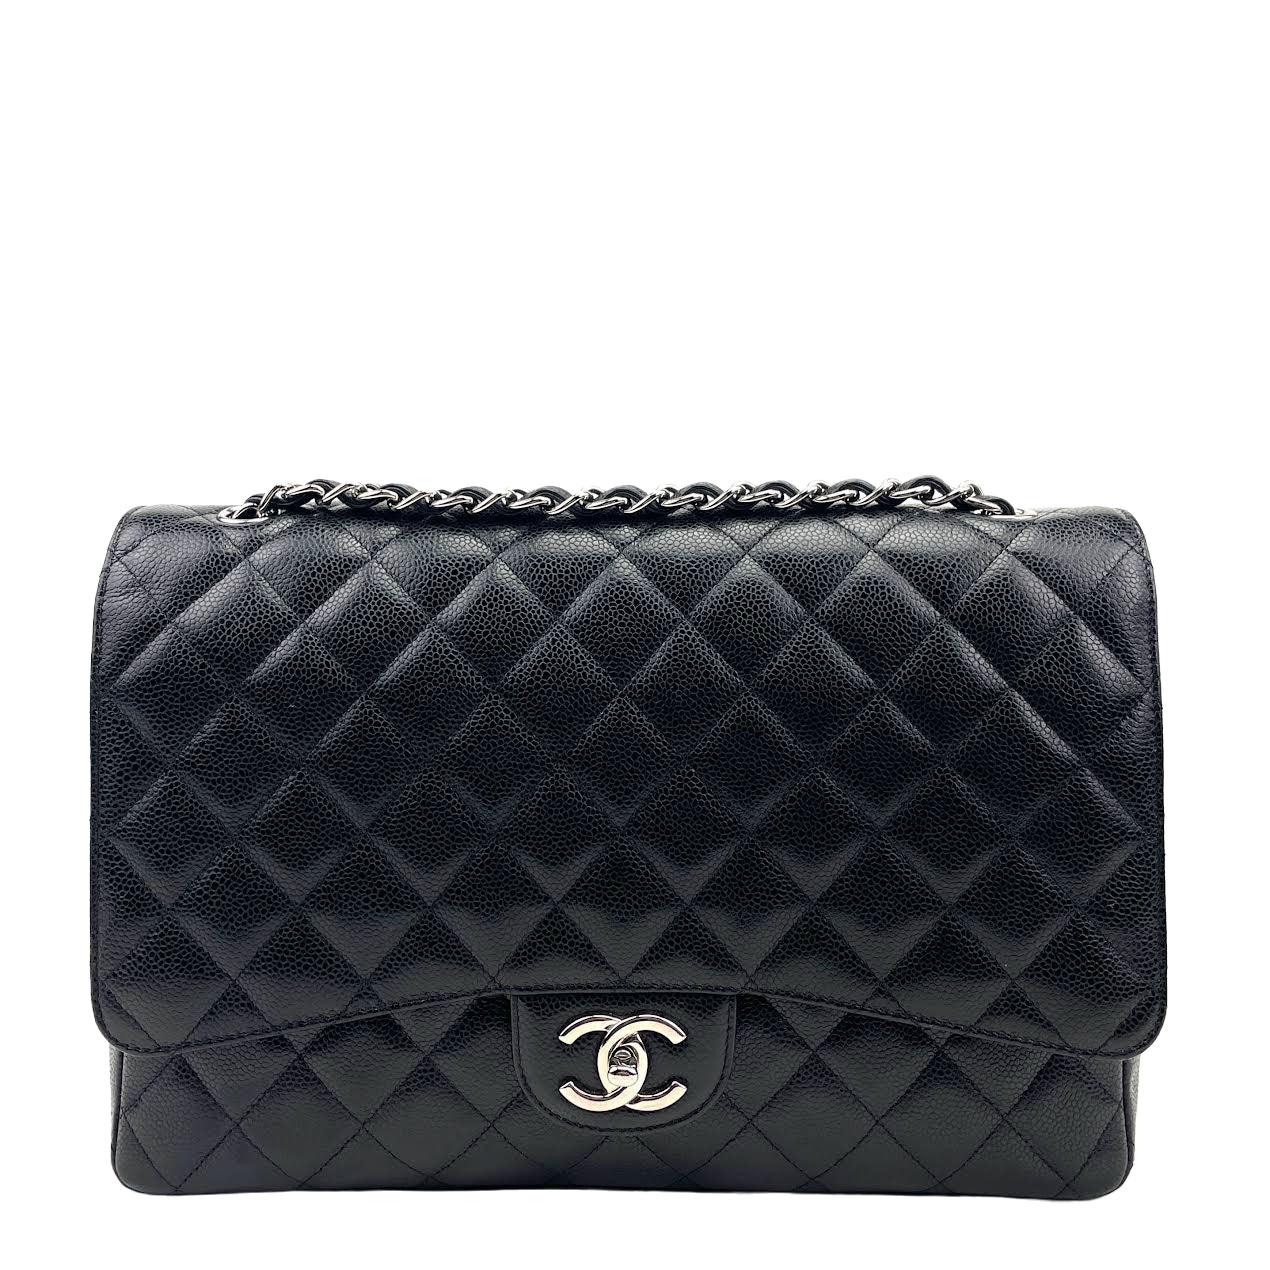 Chanel Caviar Quilted Jumbo Double Flap Black